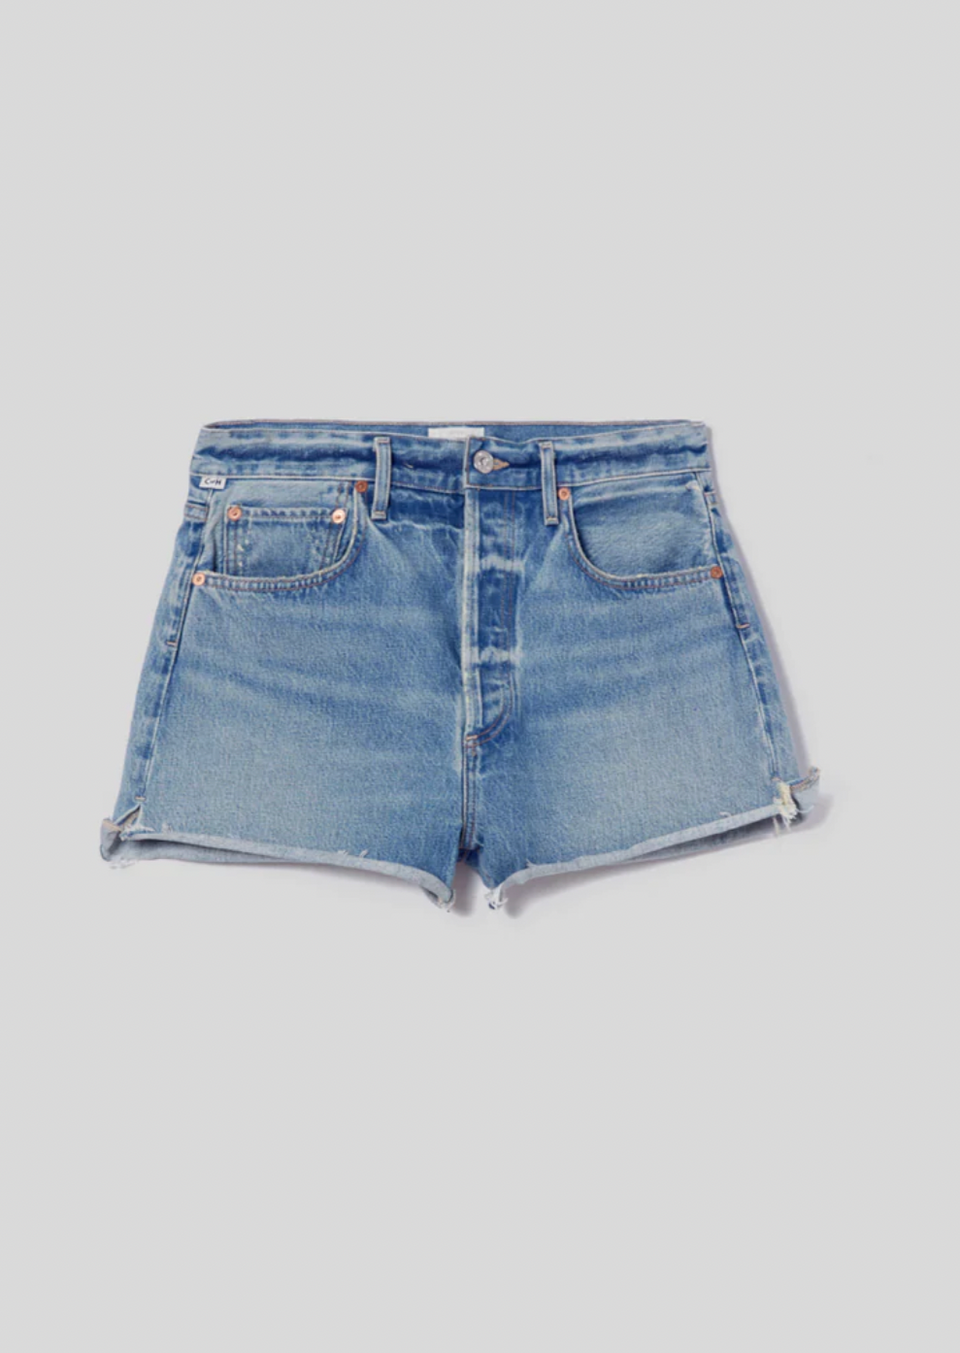 The Marlow Vintage Denim Short from Citizens of Humanity